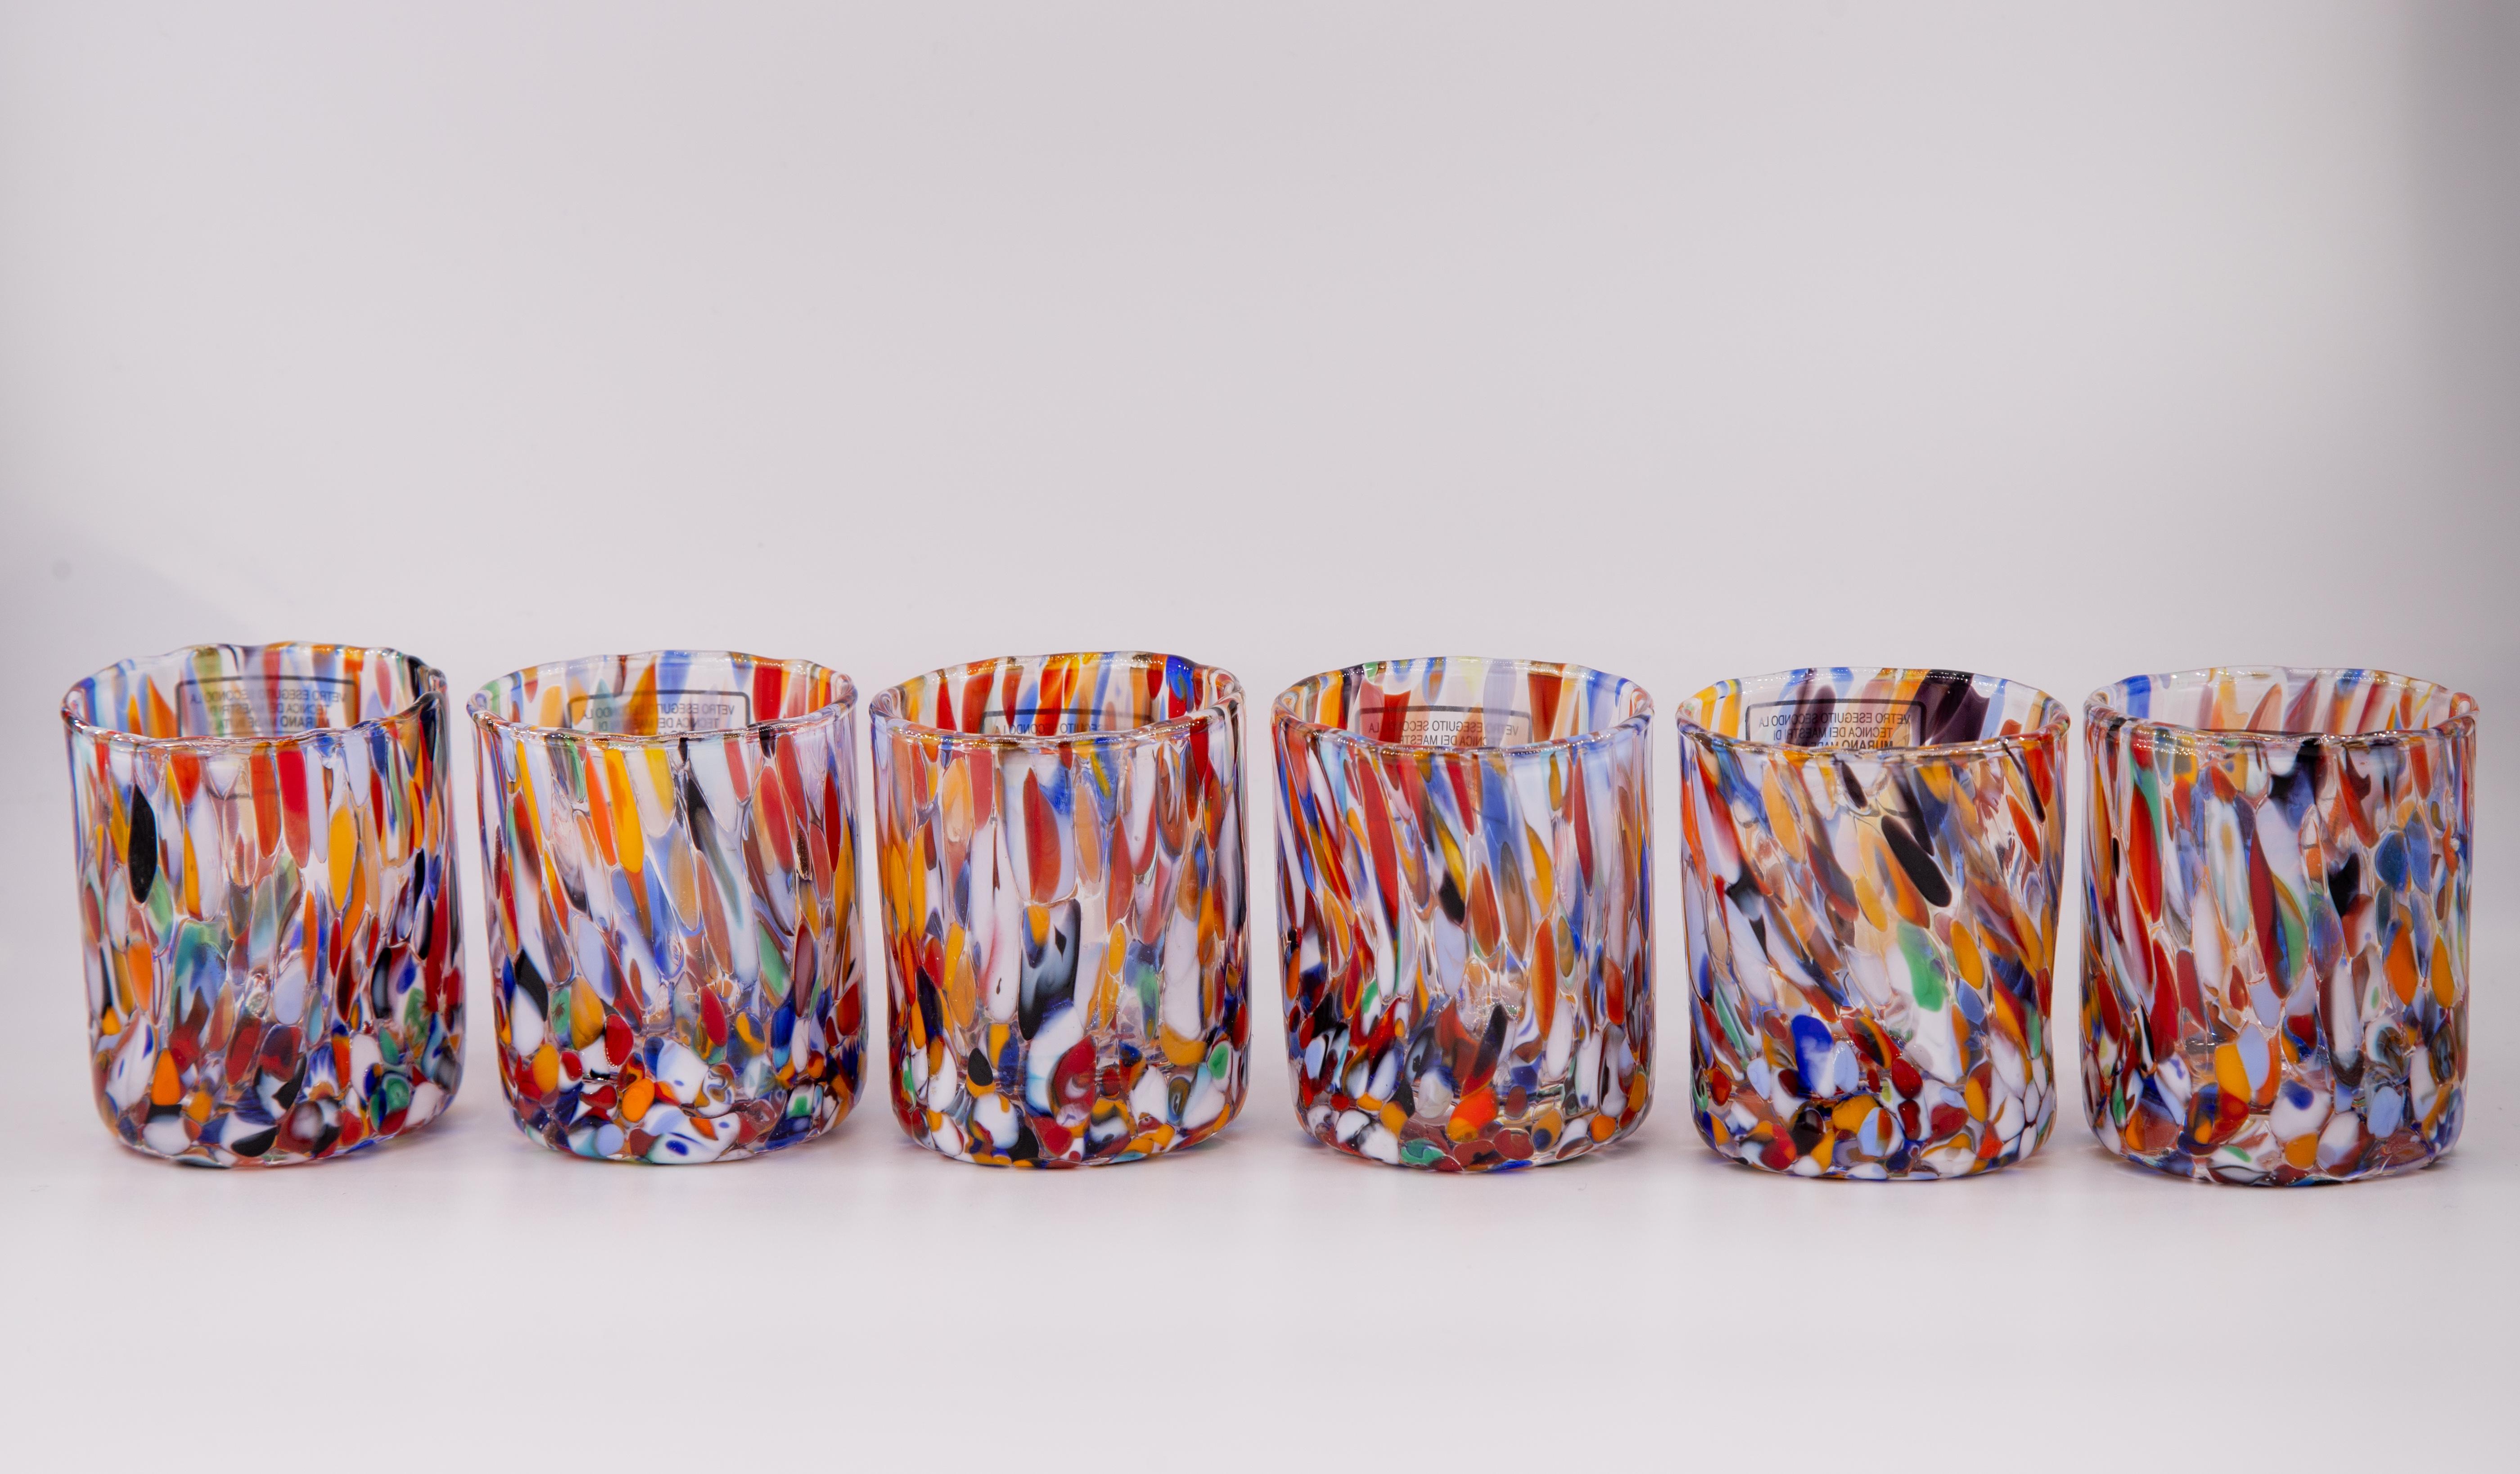 Set of six shot/coffee glasses color Millefiori - Murano glass - Made in Italy.

These individual Murano glasses are inspired by the classic 